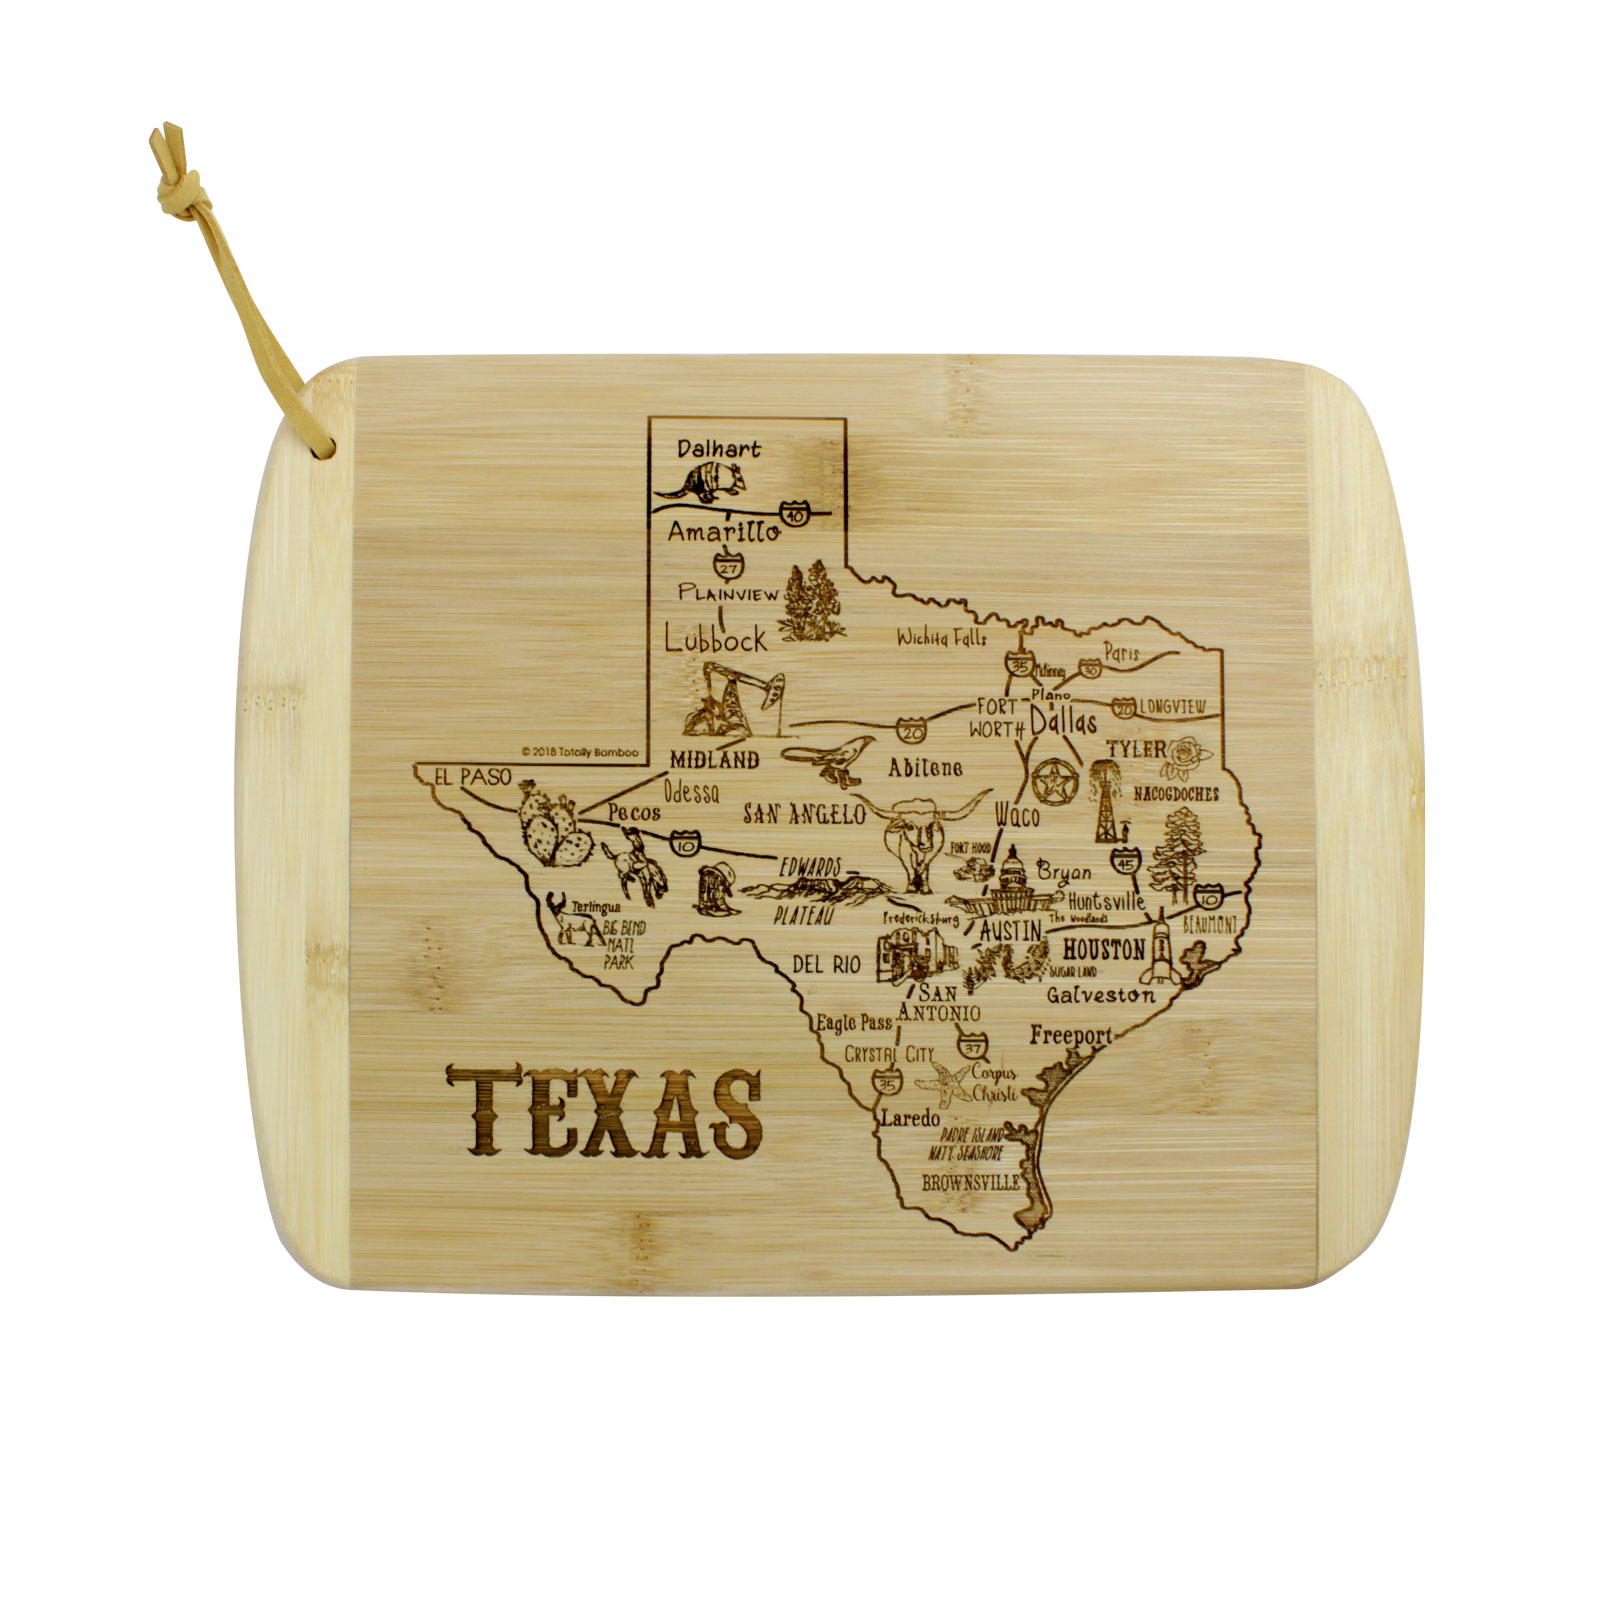 The Bamboo Land Bamboo Cutting Board Is Popular on